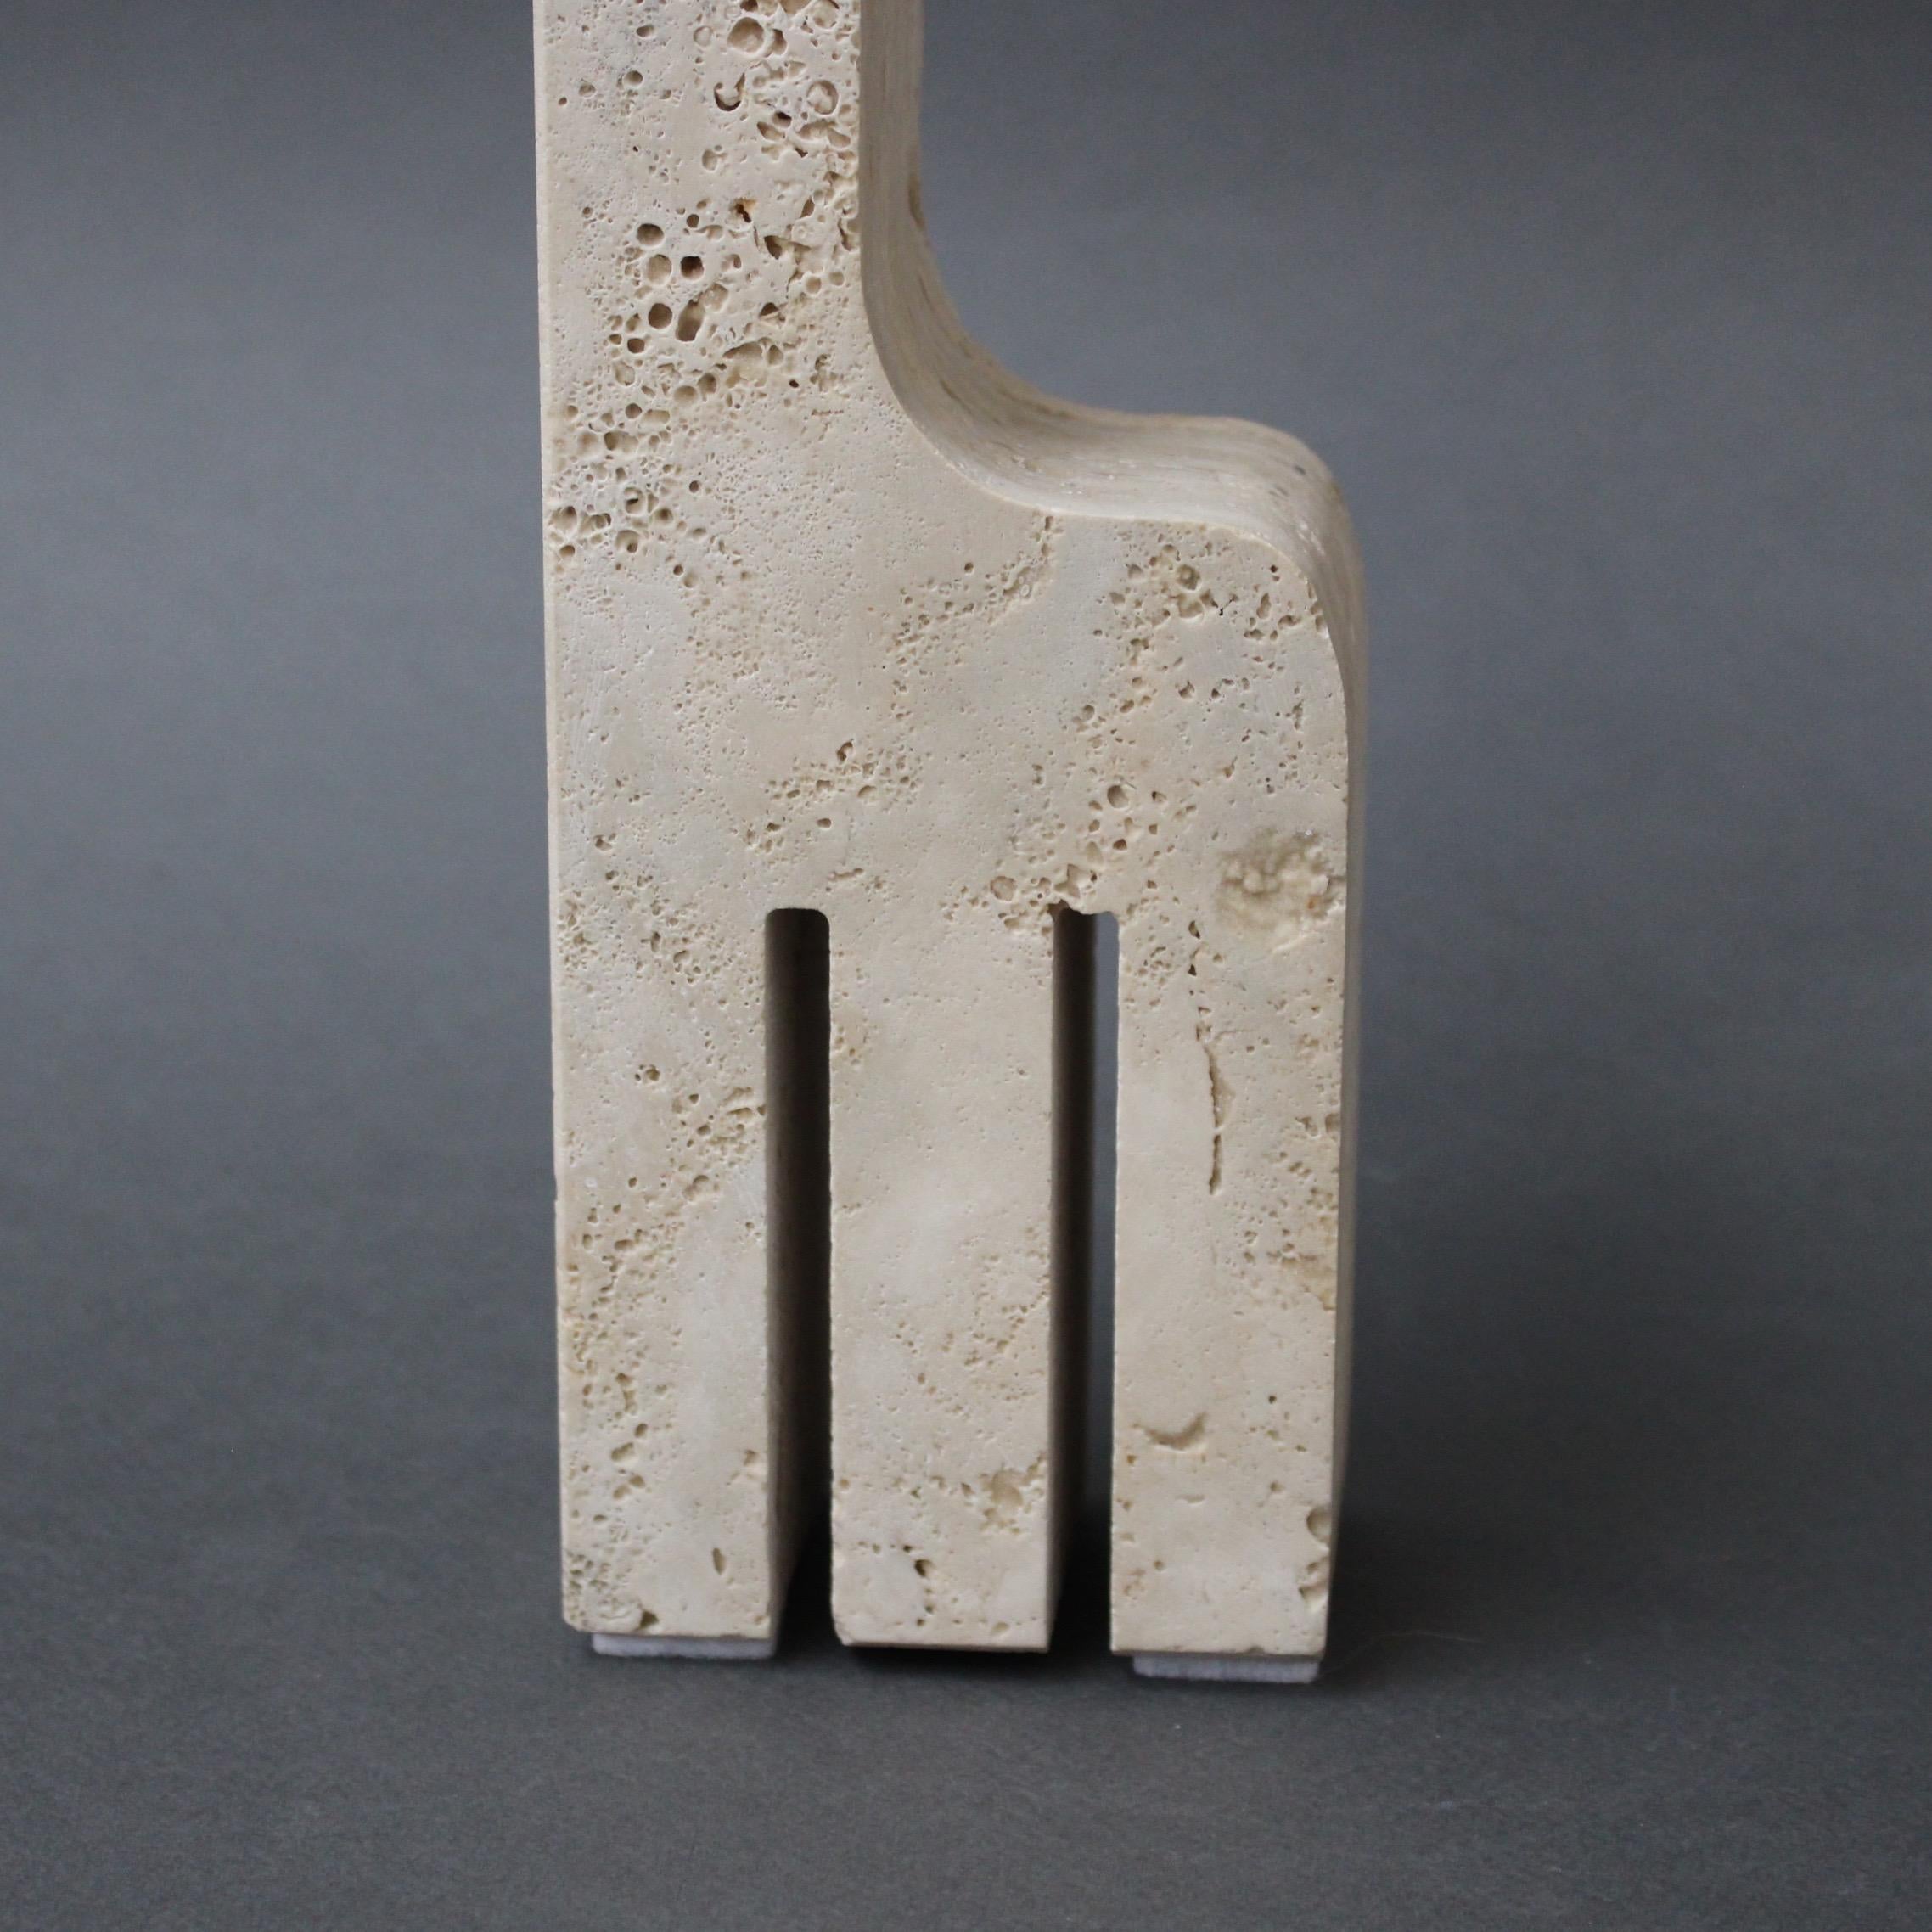 Travertine Giraffe Table Sculpture by Mannelli Bros of Florence, Italy c. 1970s 3